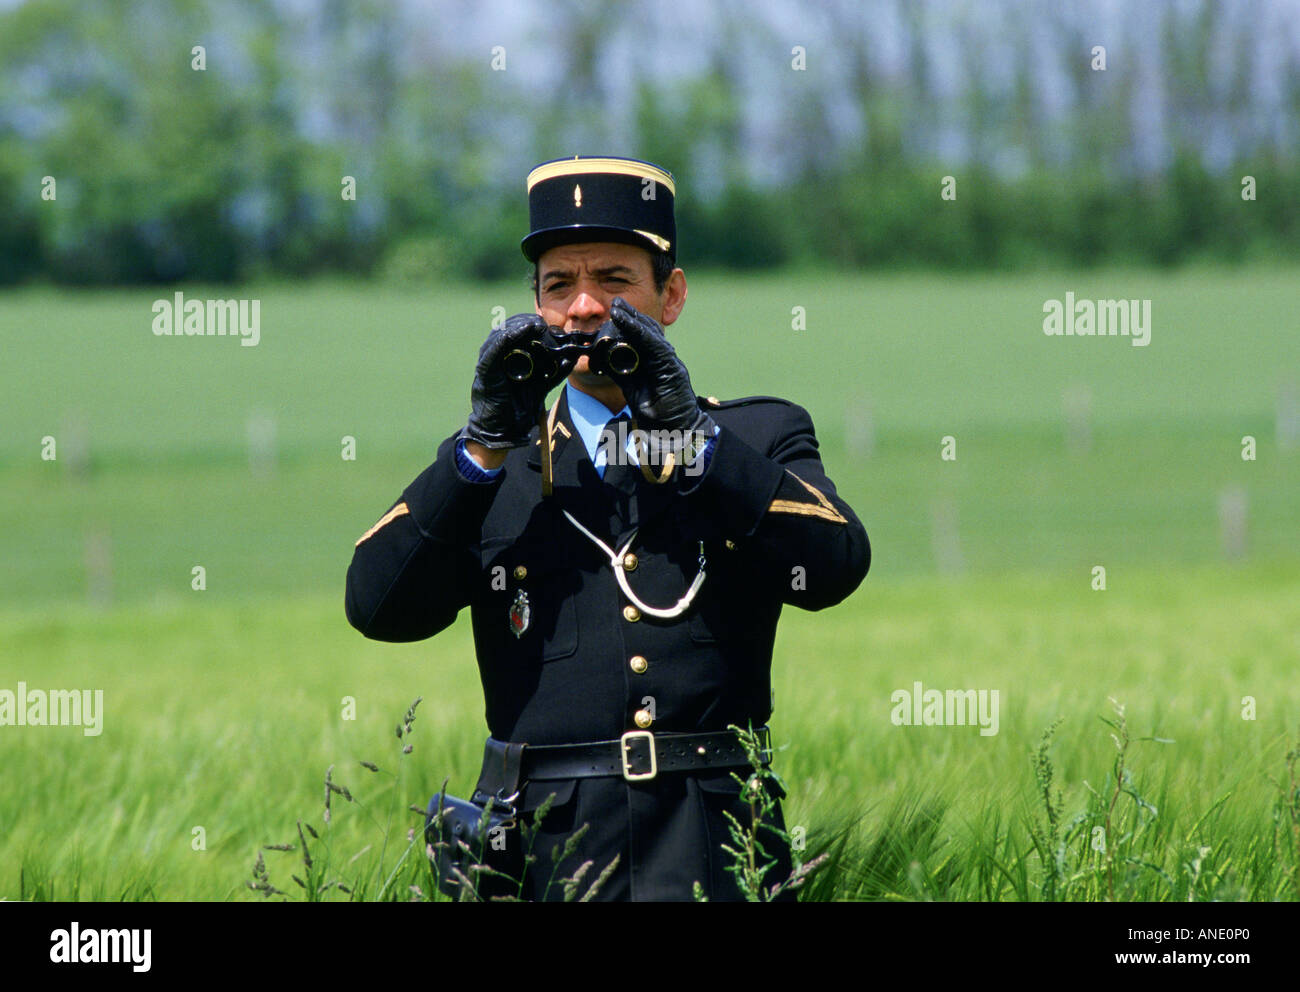 French gendarme police officer on security duty during Normandy celebrations France Stock Photo